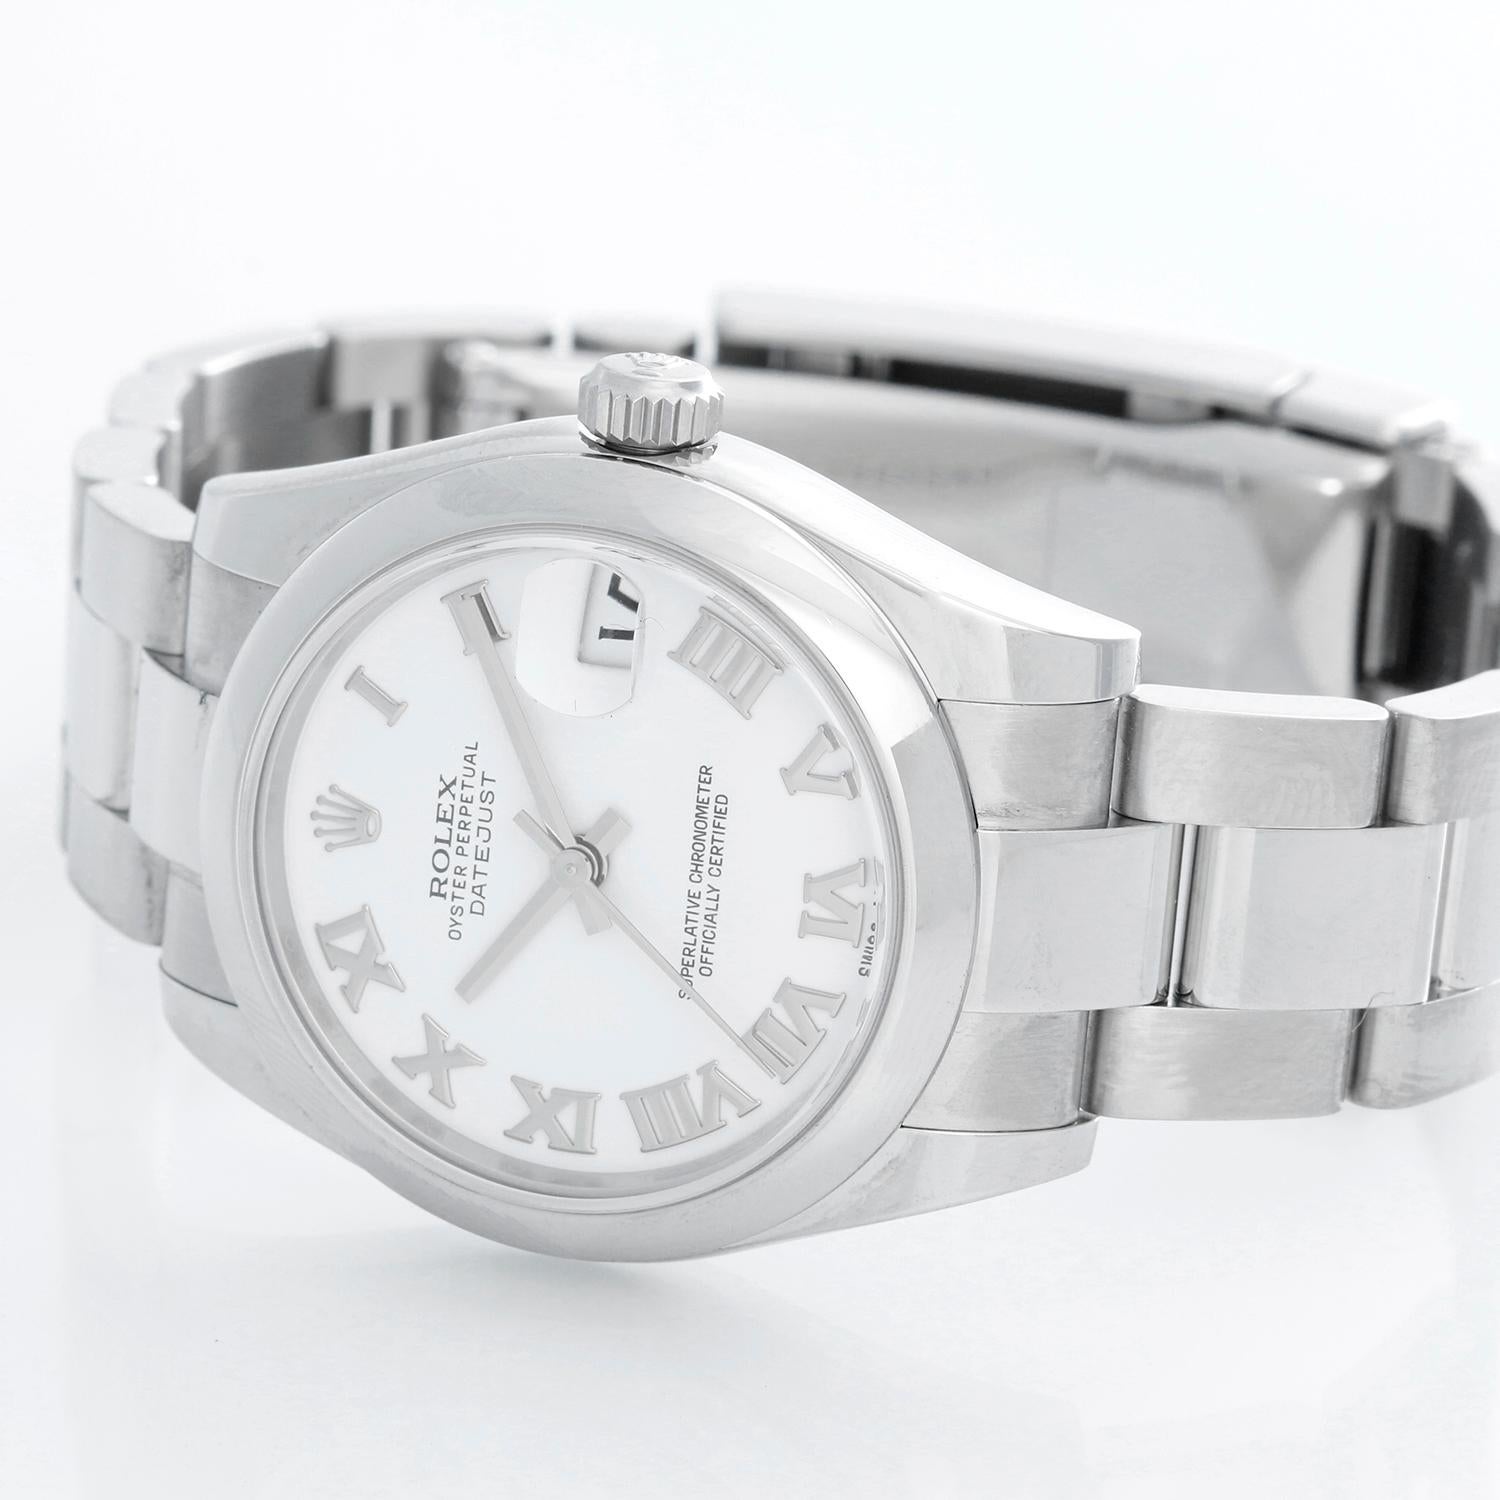 Rolex Datejust Midsize Men's or Ladies Steel Watch 178240 - Automatic winding, 31 jewels, Quickset date, sapphire crystal. Stainless steel case with smooth bezel ( 31 mm ). White dial with Roman numerals. Stainless steel oyster bracelet. Pre-owned